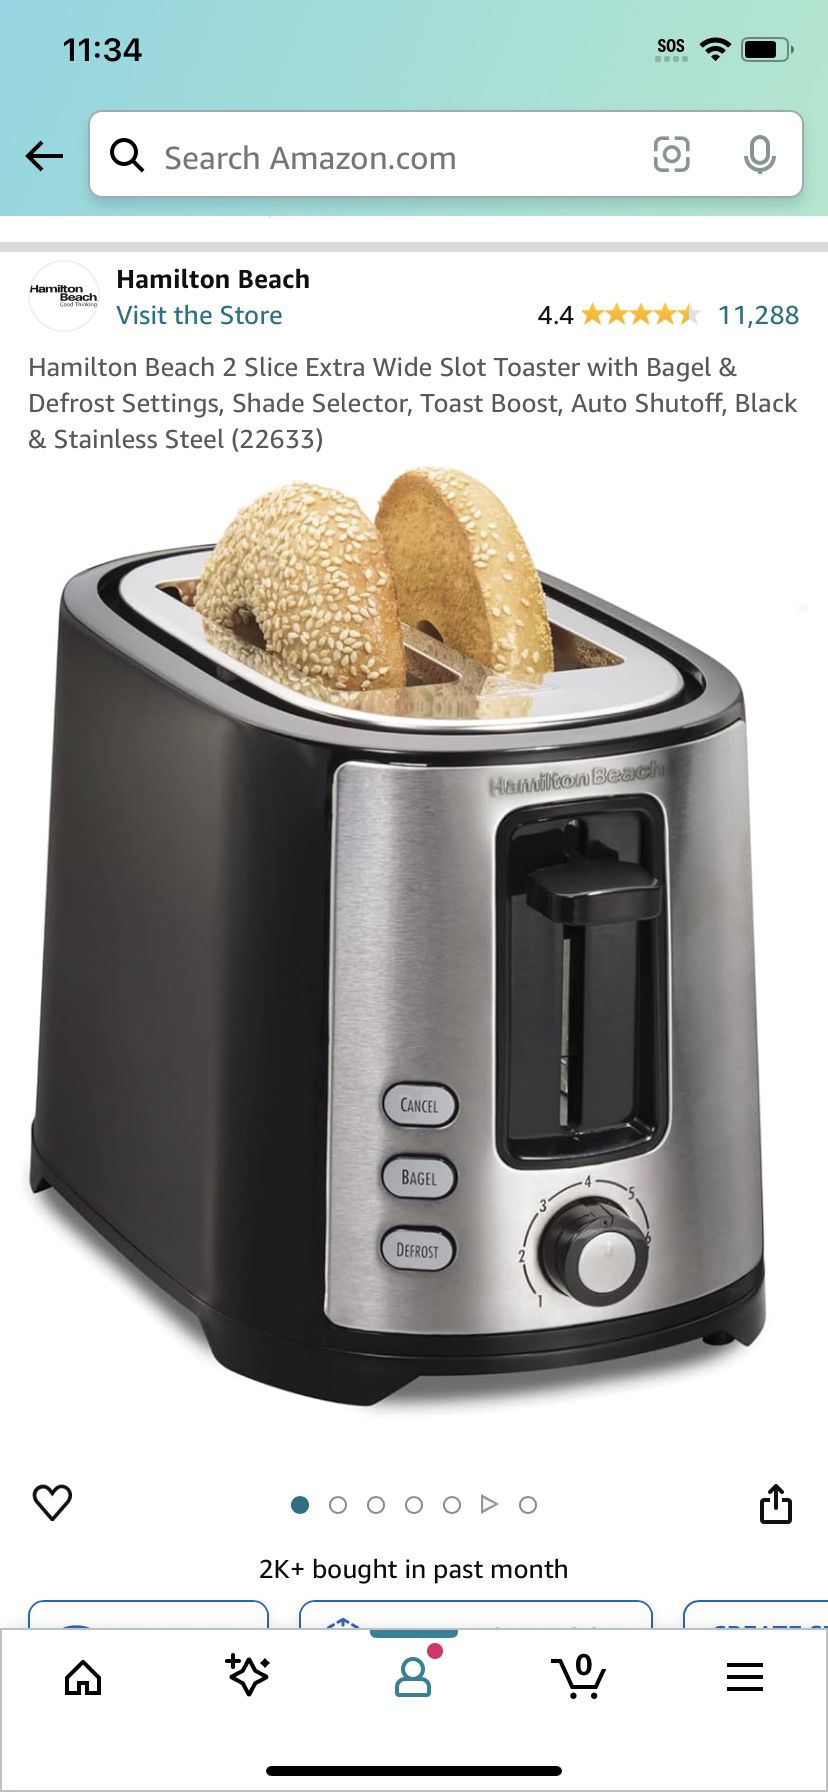 Hamilton Beach 2 Slice Extra Wide Slot Toaster with Bagel & Defrost Settings, Shade Selector, Toast Boost, Auto Shutoff, Black & Stainless Steel (2263